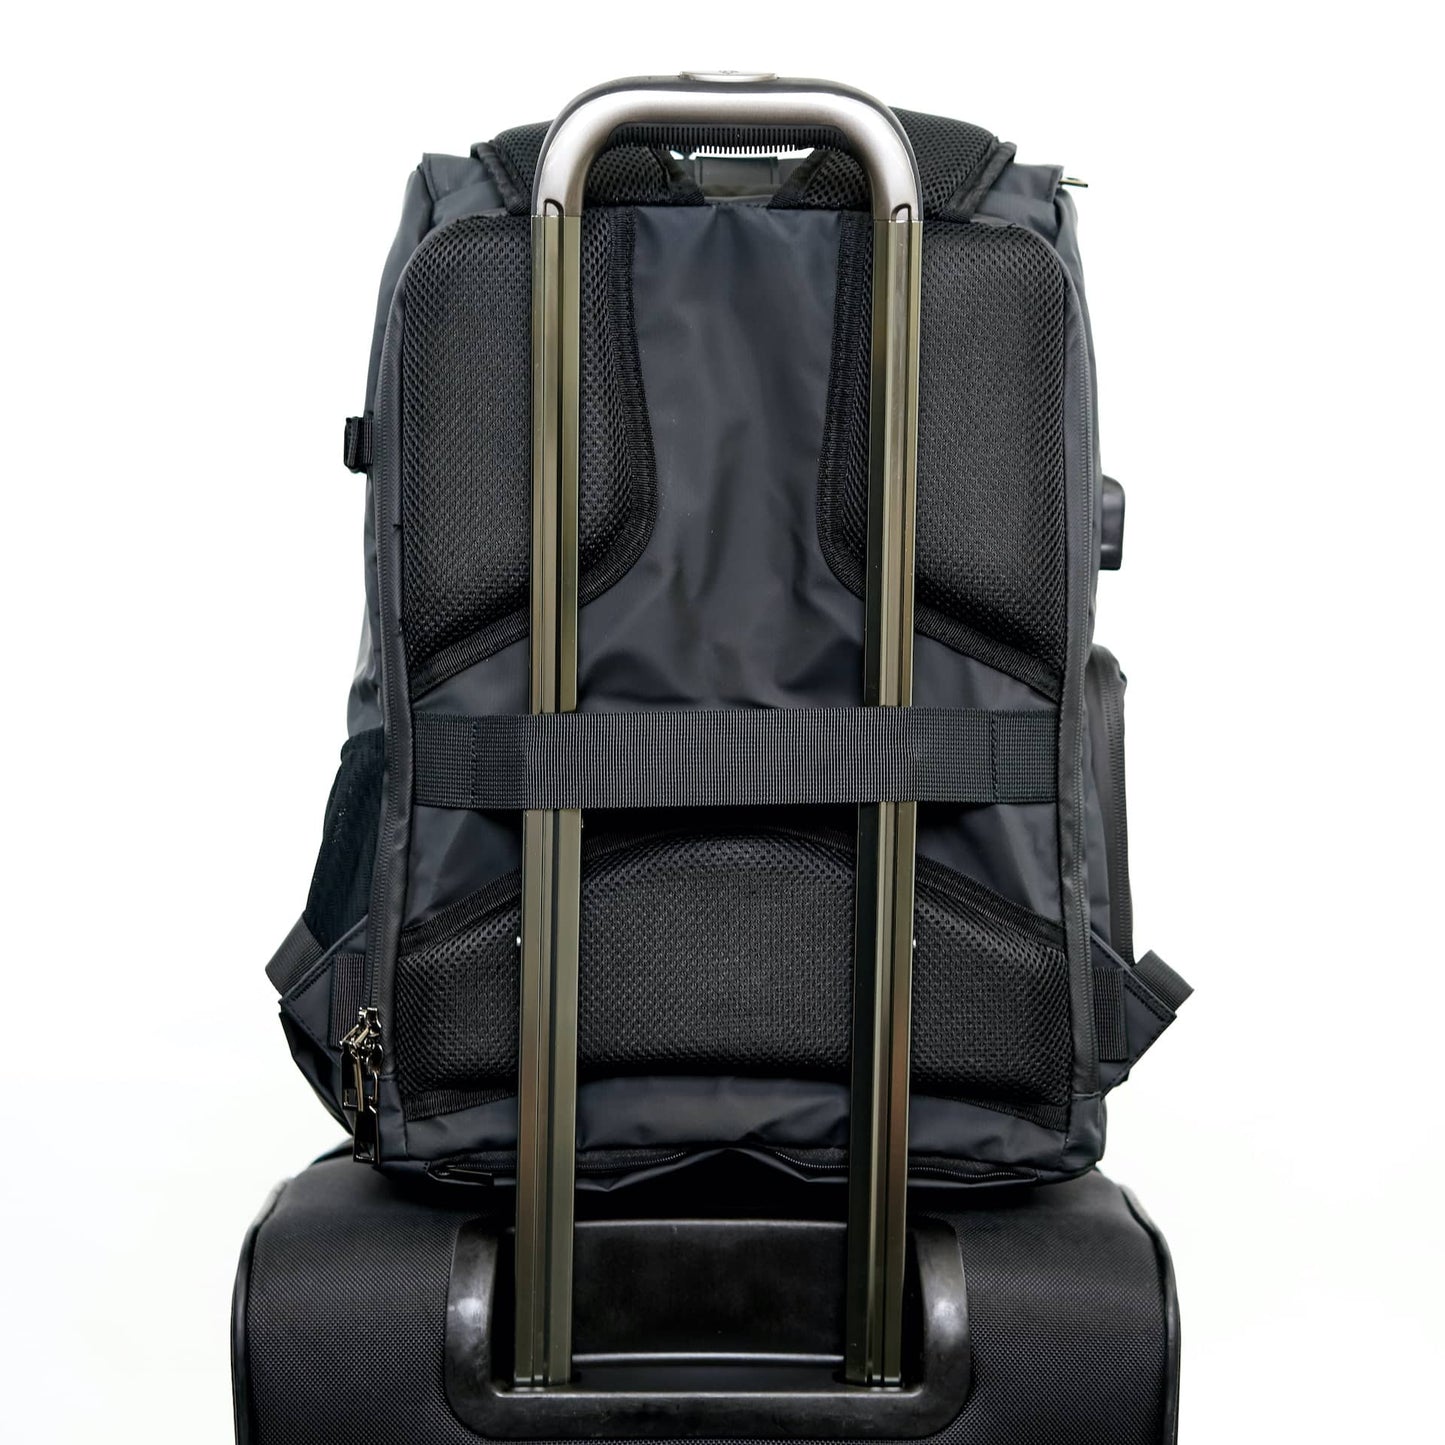 The Voyager Camera Backpack